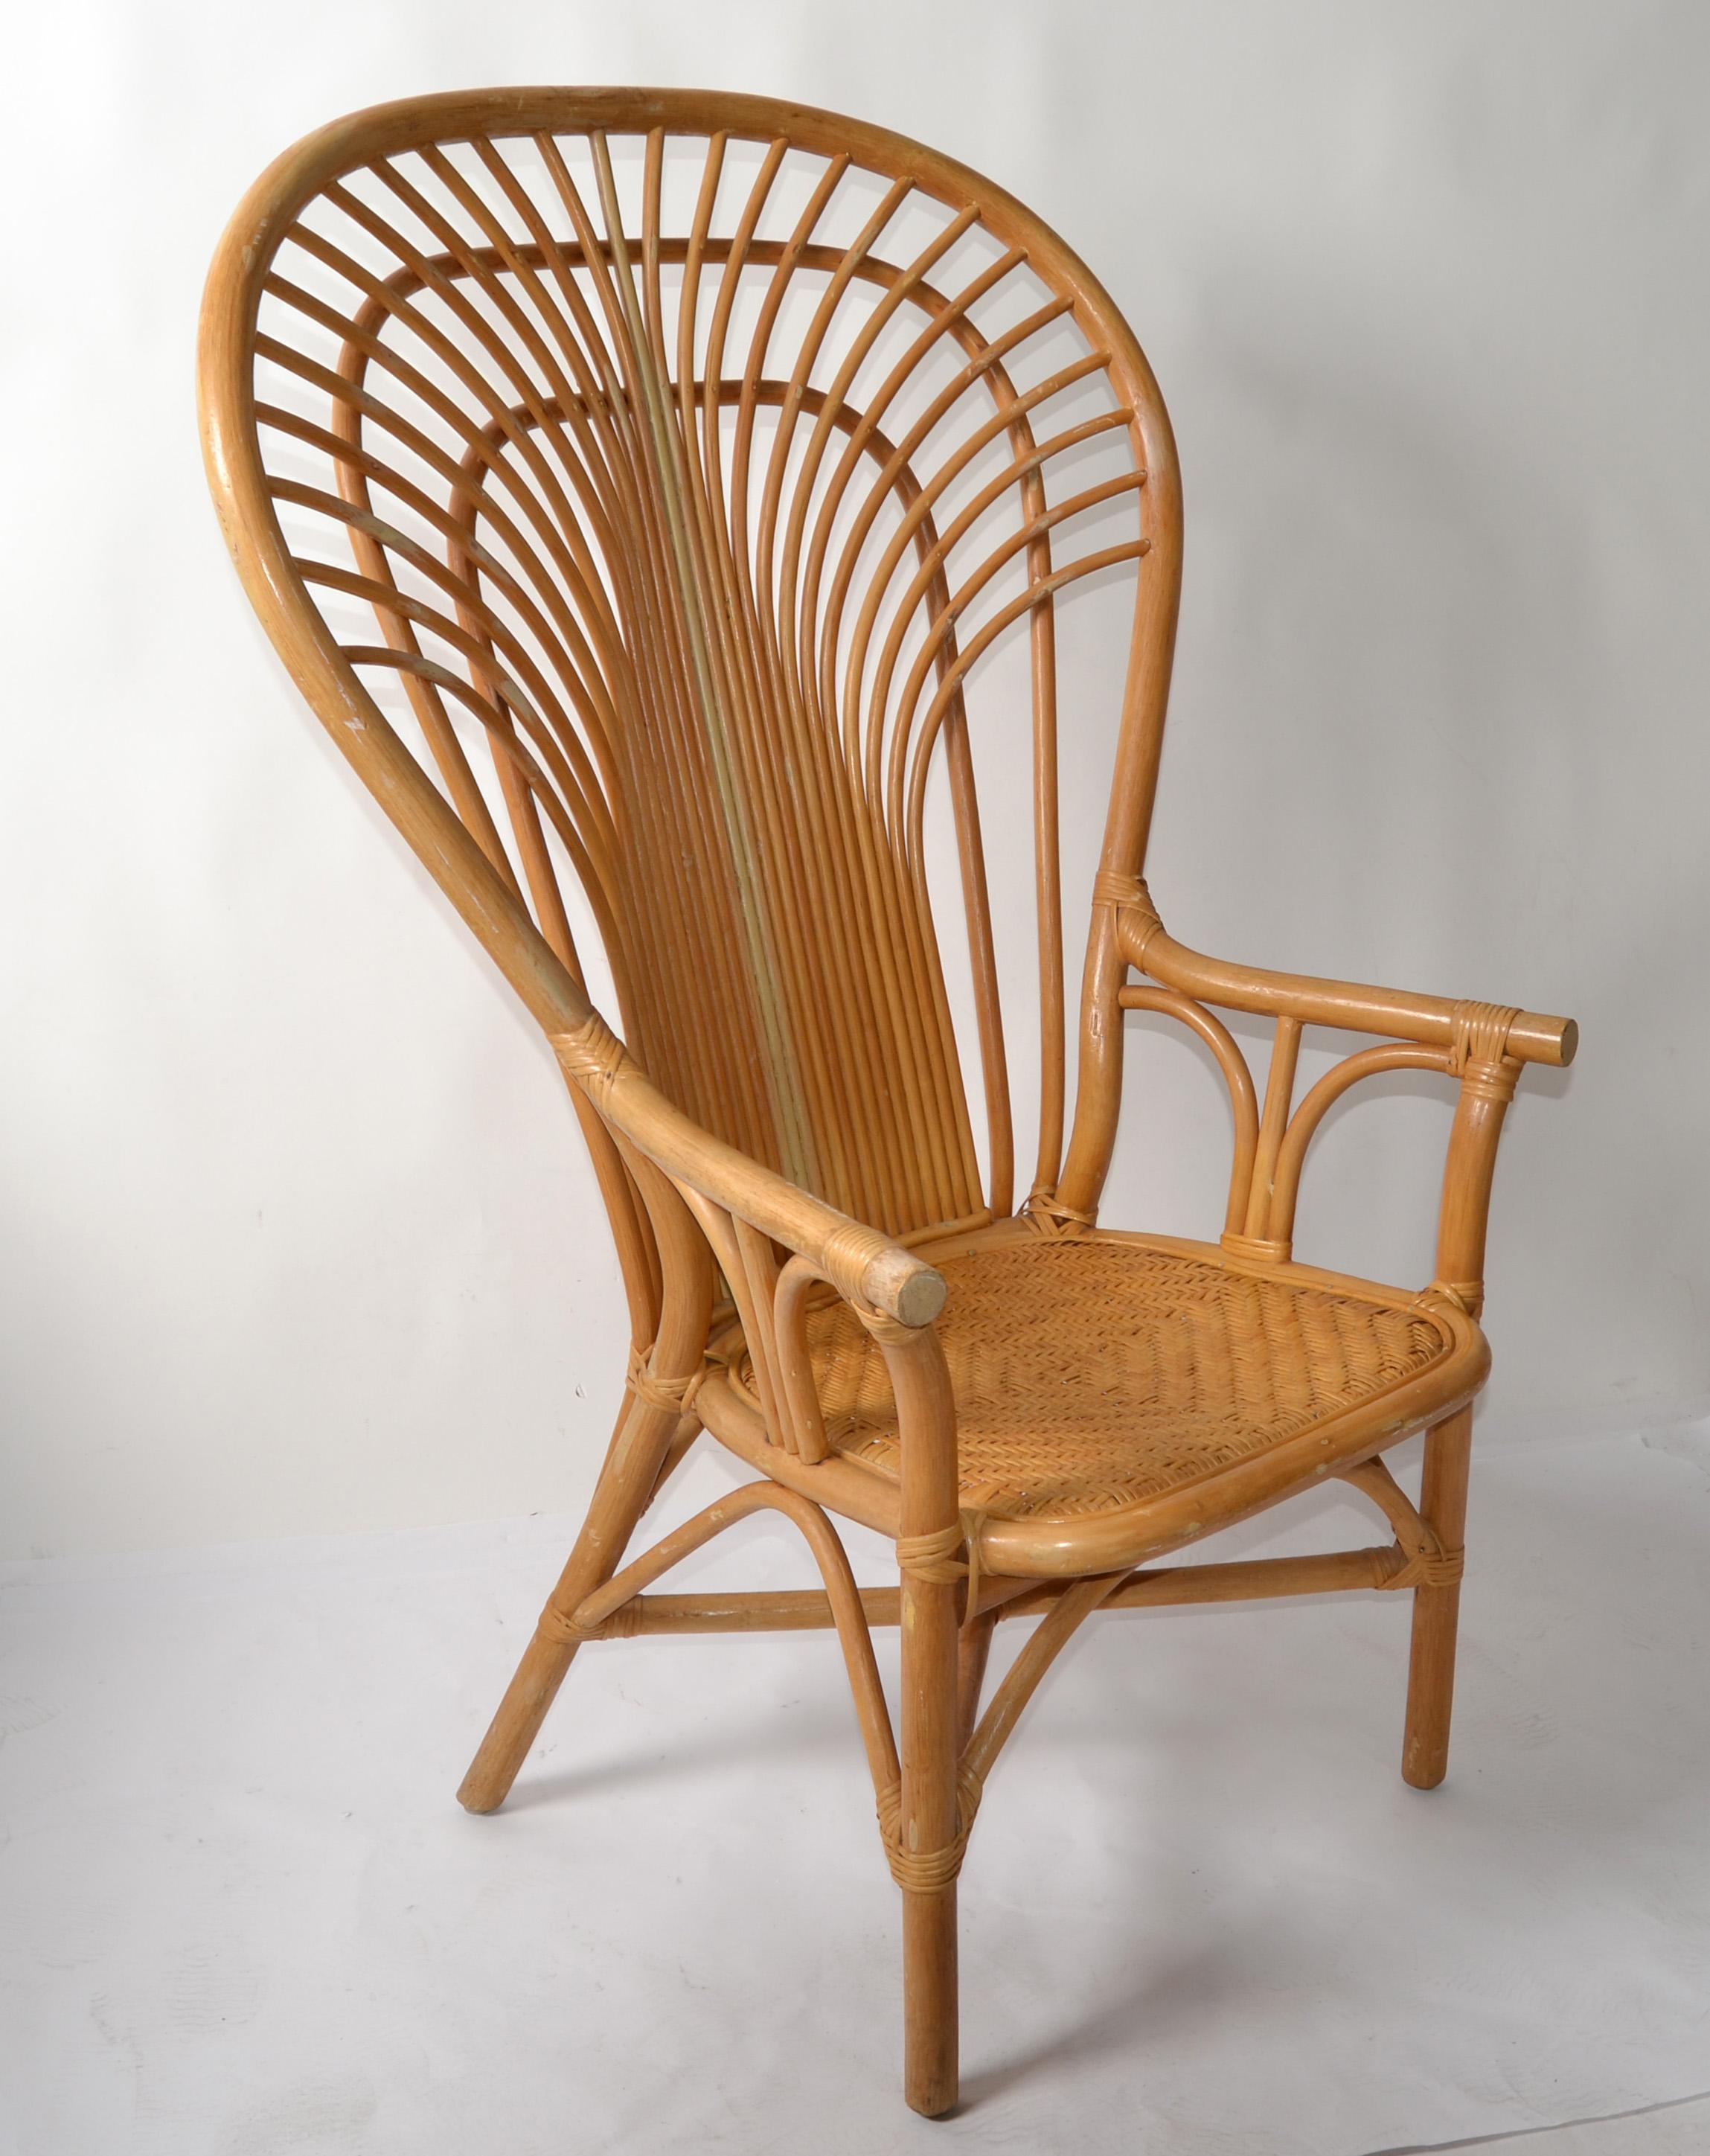 Stunning Boho Chic handwoven vintage Beige Wingback peacock chair from the 1970s.
Made out of Bamboo Wicker, Rattan and split reed handmade and handwoven seat.
Gold Foil Label at the base, made in the Philippines. 
Great for indoor and outdoor